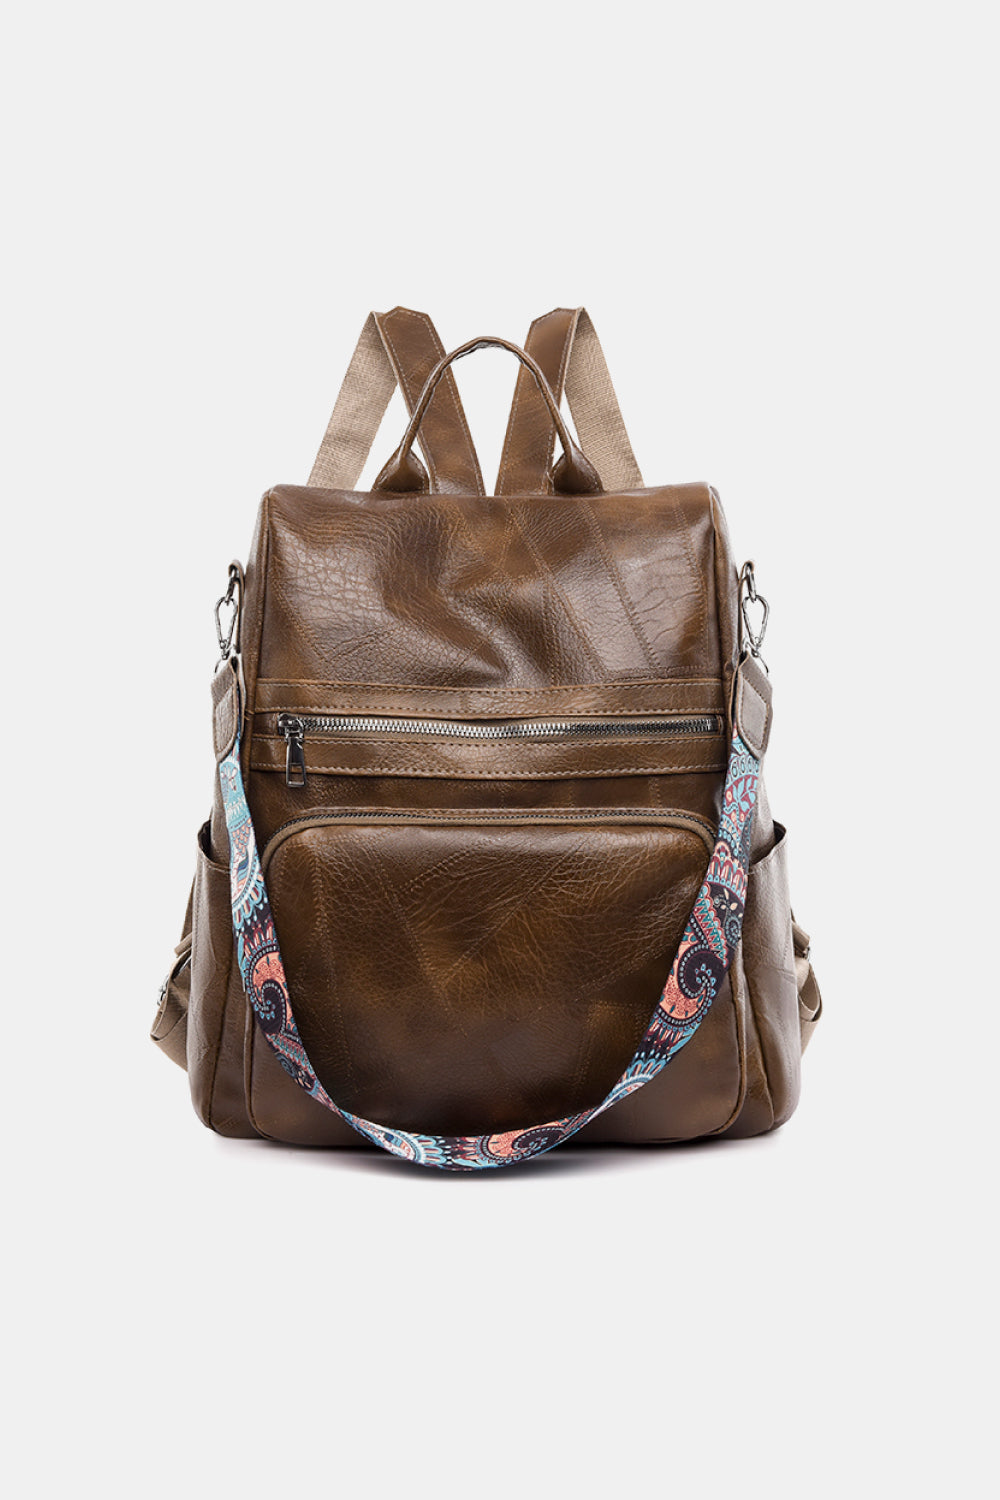 Never Better Backpack - Cheeky Chic Boutique